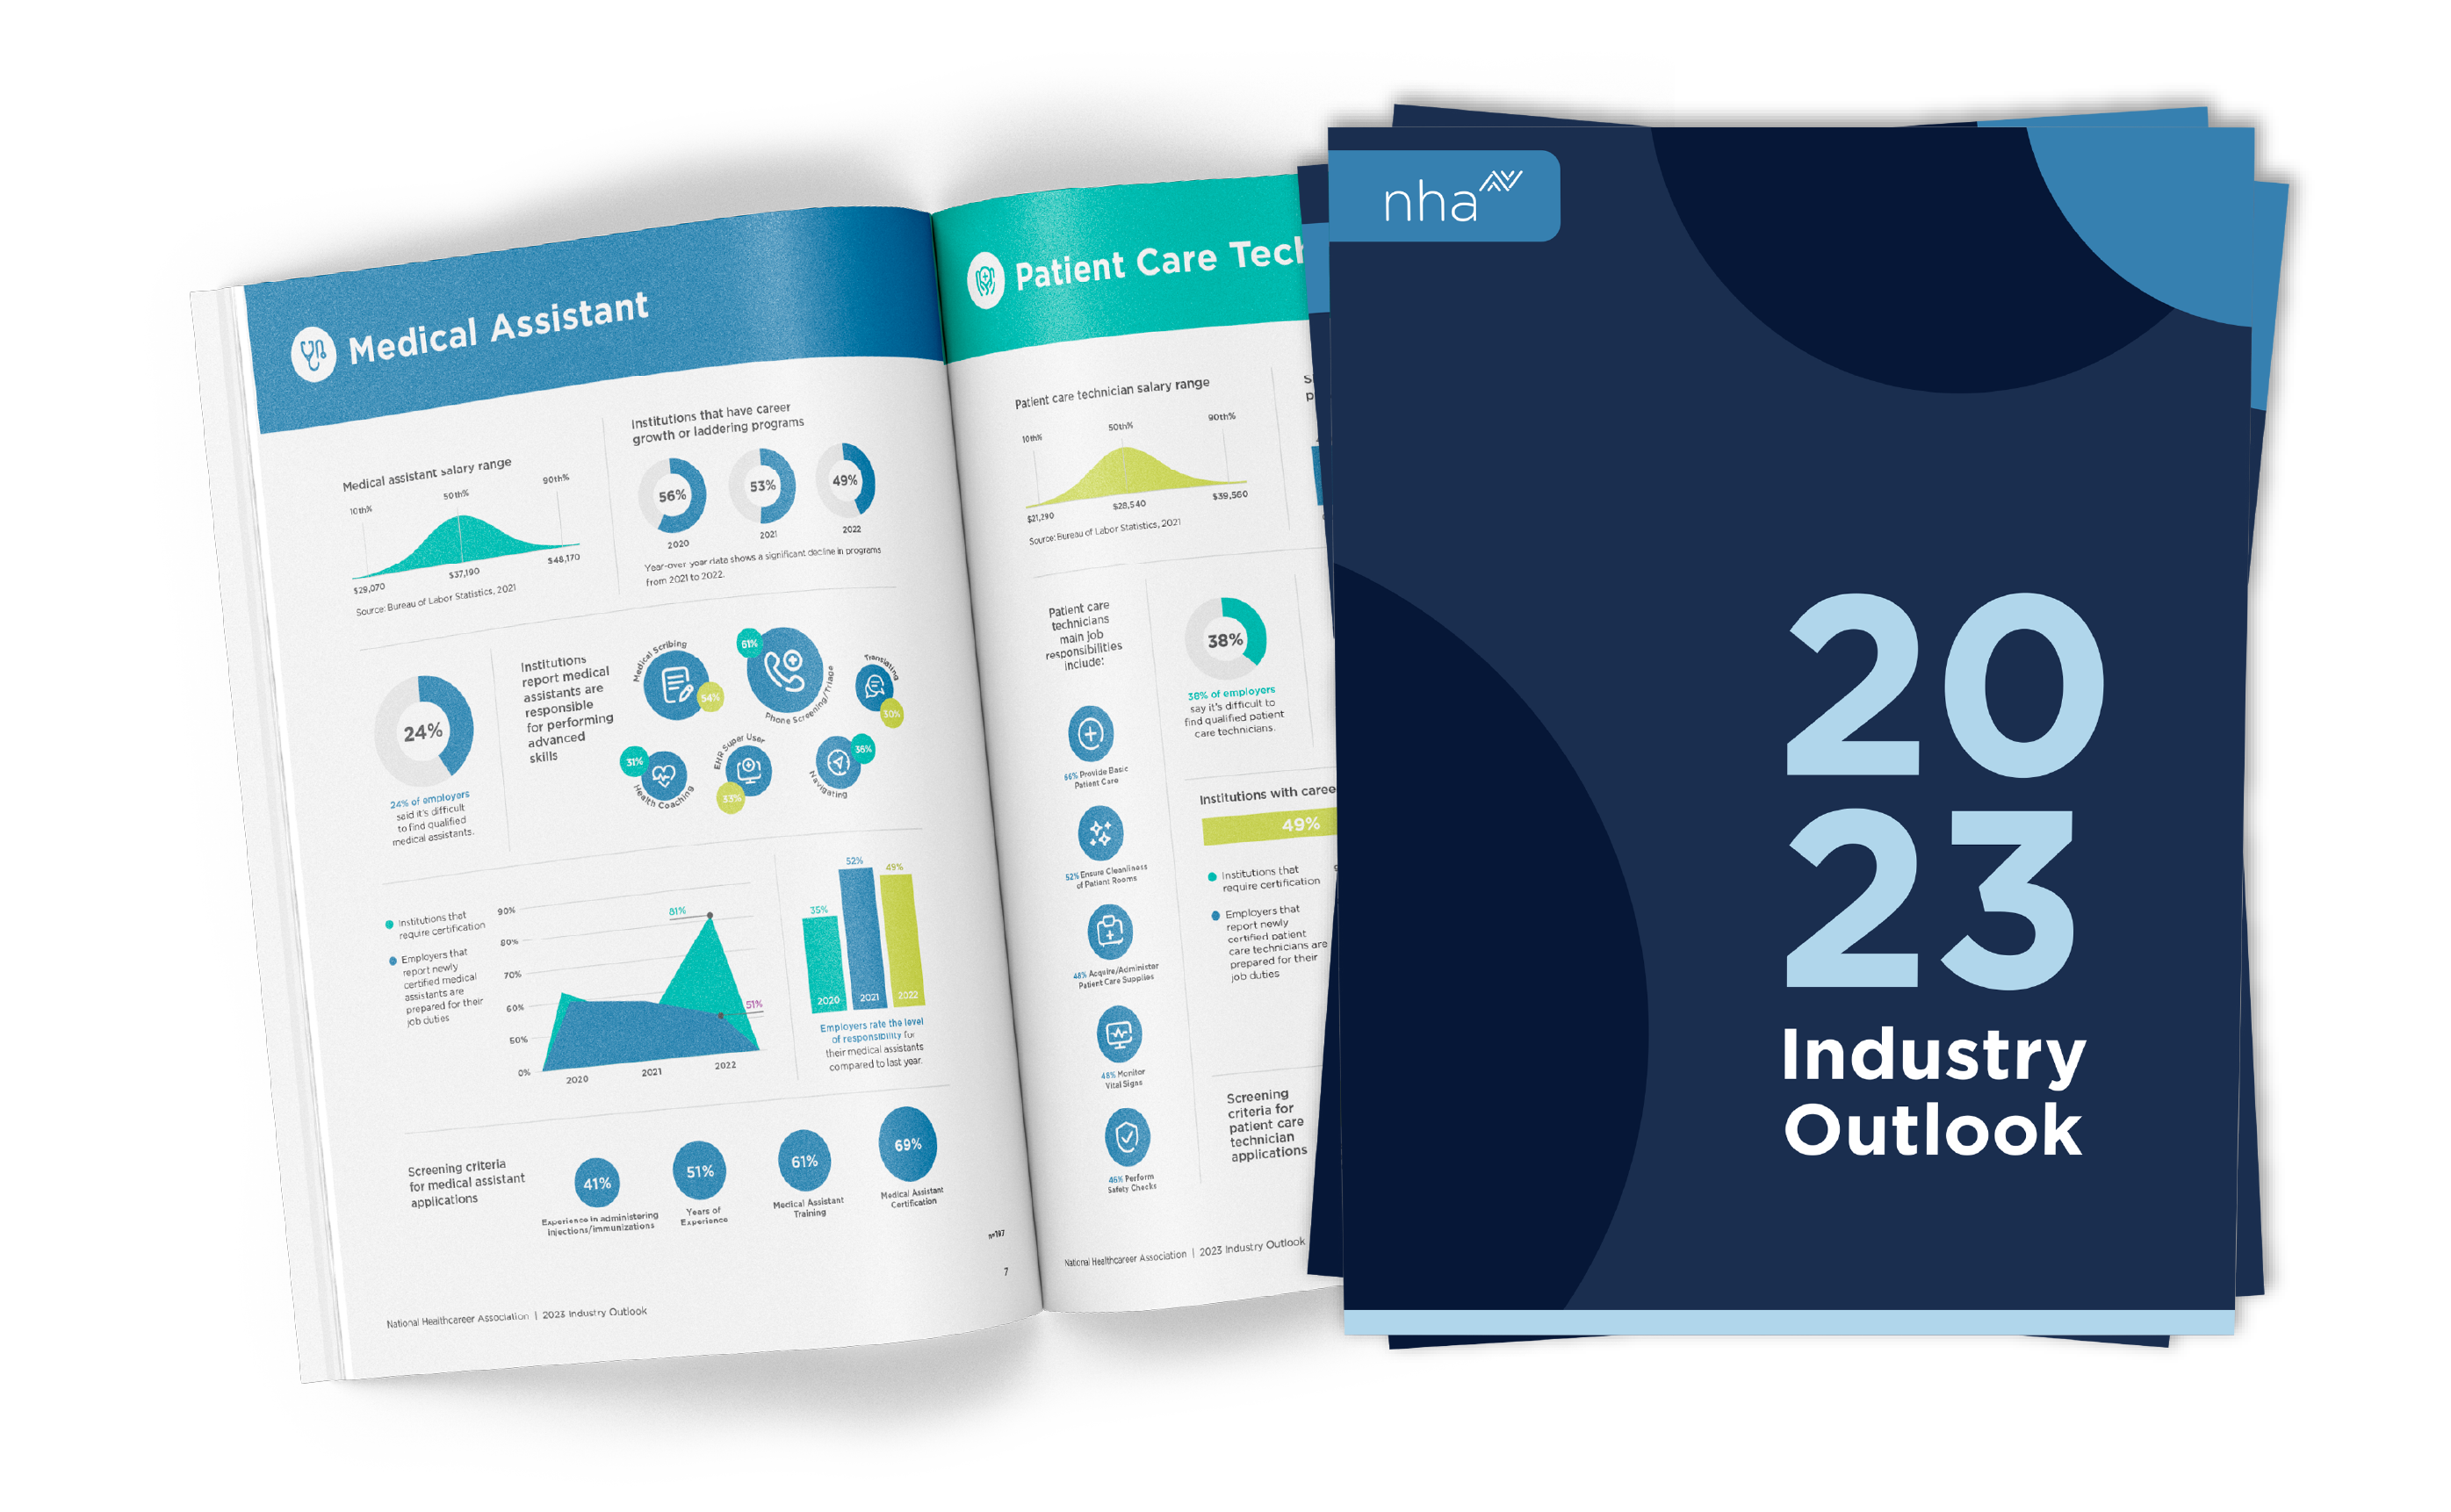 cover of the Industry Outlook and inside page